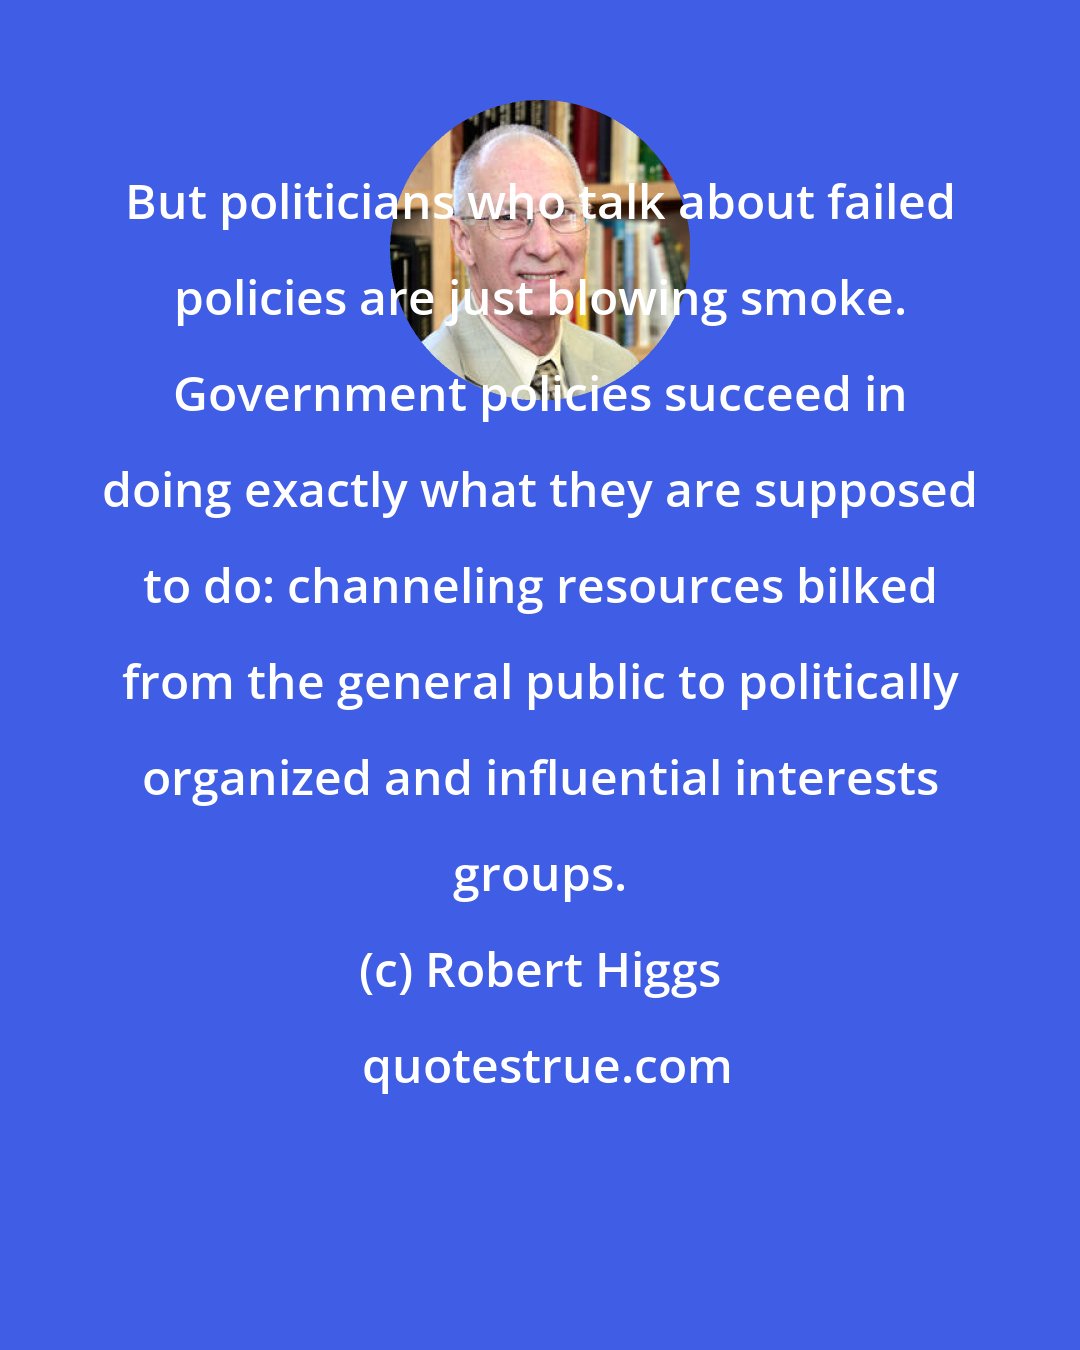 Robert Higgs: But politicians who talk about failed policies are just blowing smoke. Government policies succeed in doing exactly what they are supposed to do: channeling resources bilked from the general public to politically organized and influential interests groups.